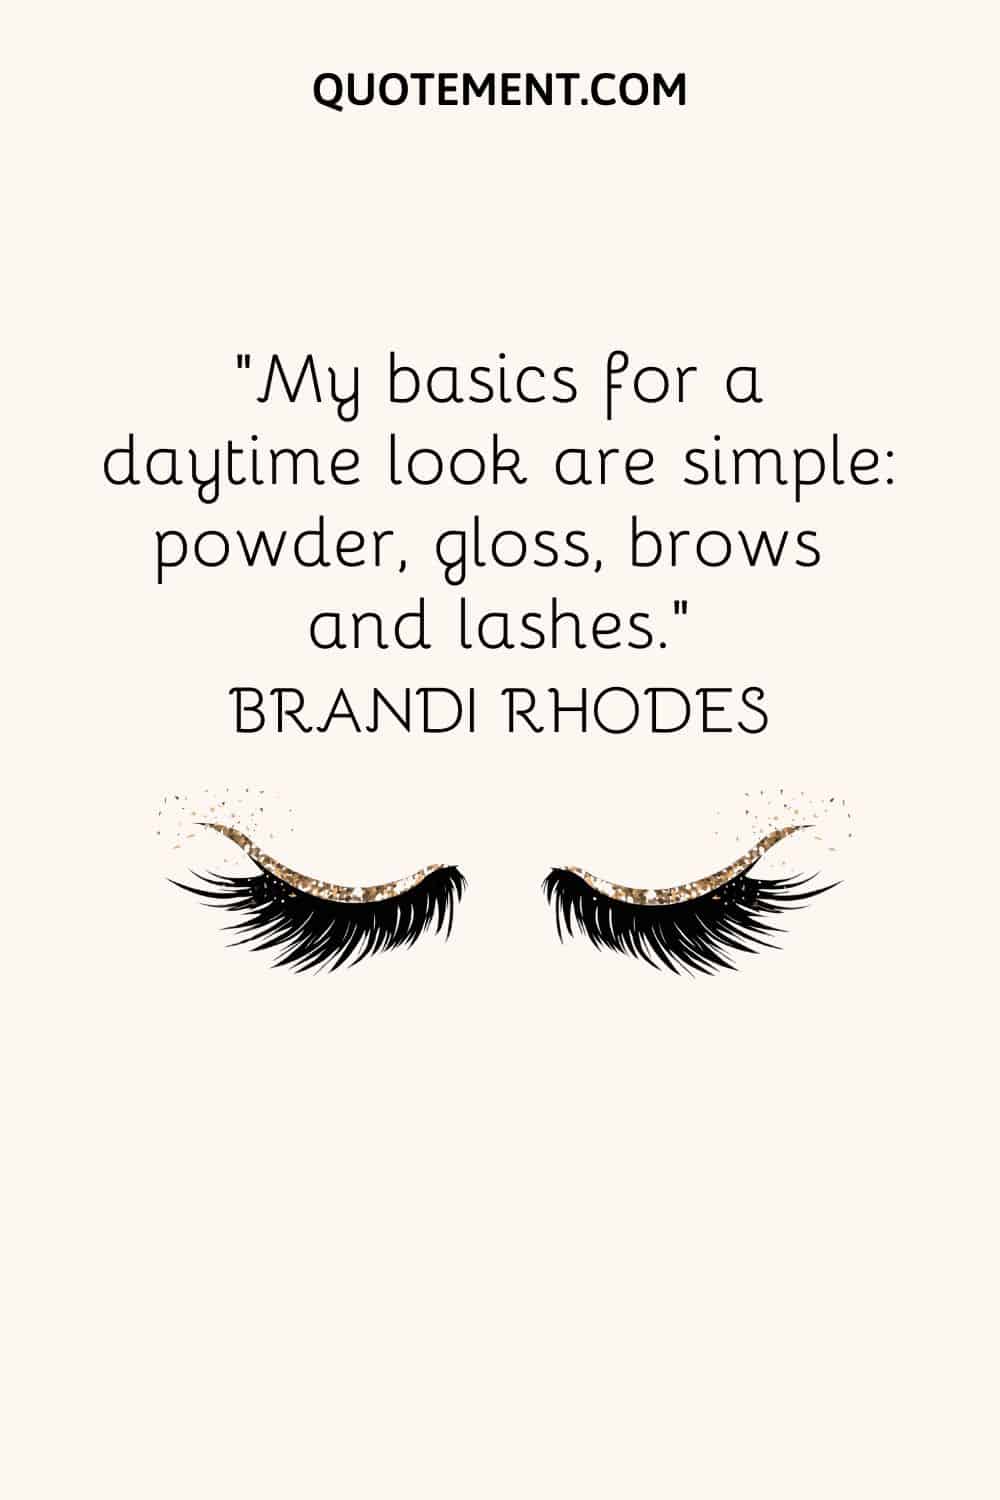 My basics for a daytime look are simple powder, gloss, brows and lashes